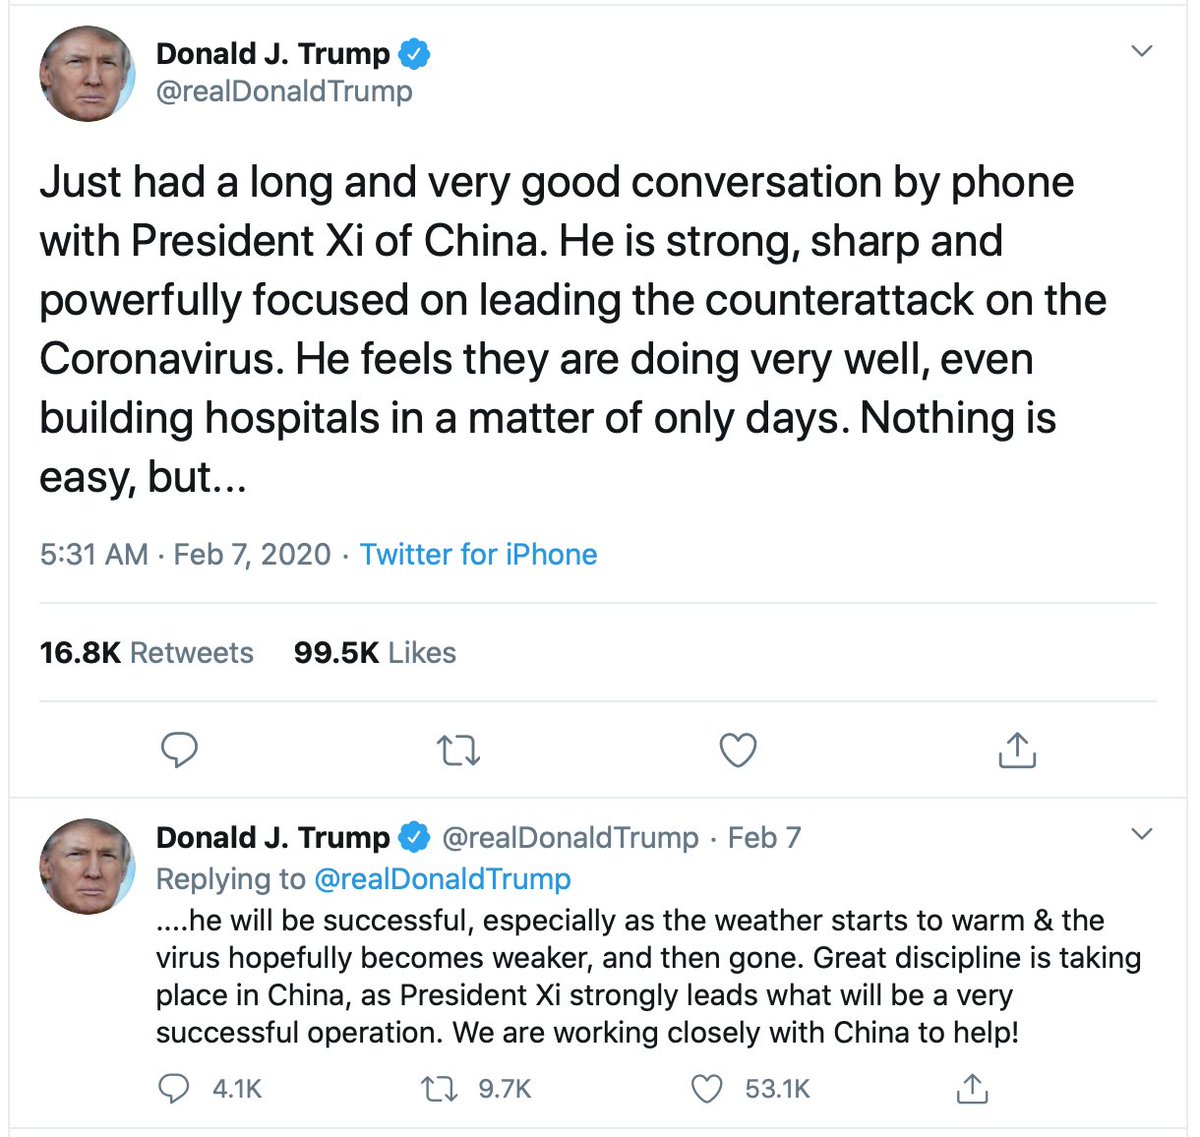 A week later, with a public health emergency declared in the U.S., Trump tweets more bizarrely personal praise of Xi, calling him "strong, sharp and powerfully focused." https://twitter.com/realDonaldTrump/status/1225728755248828416?s=20